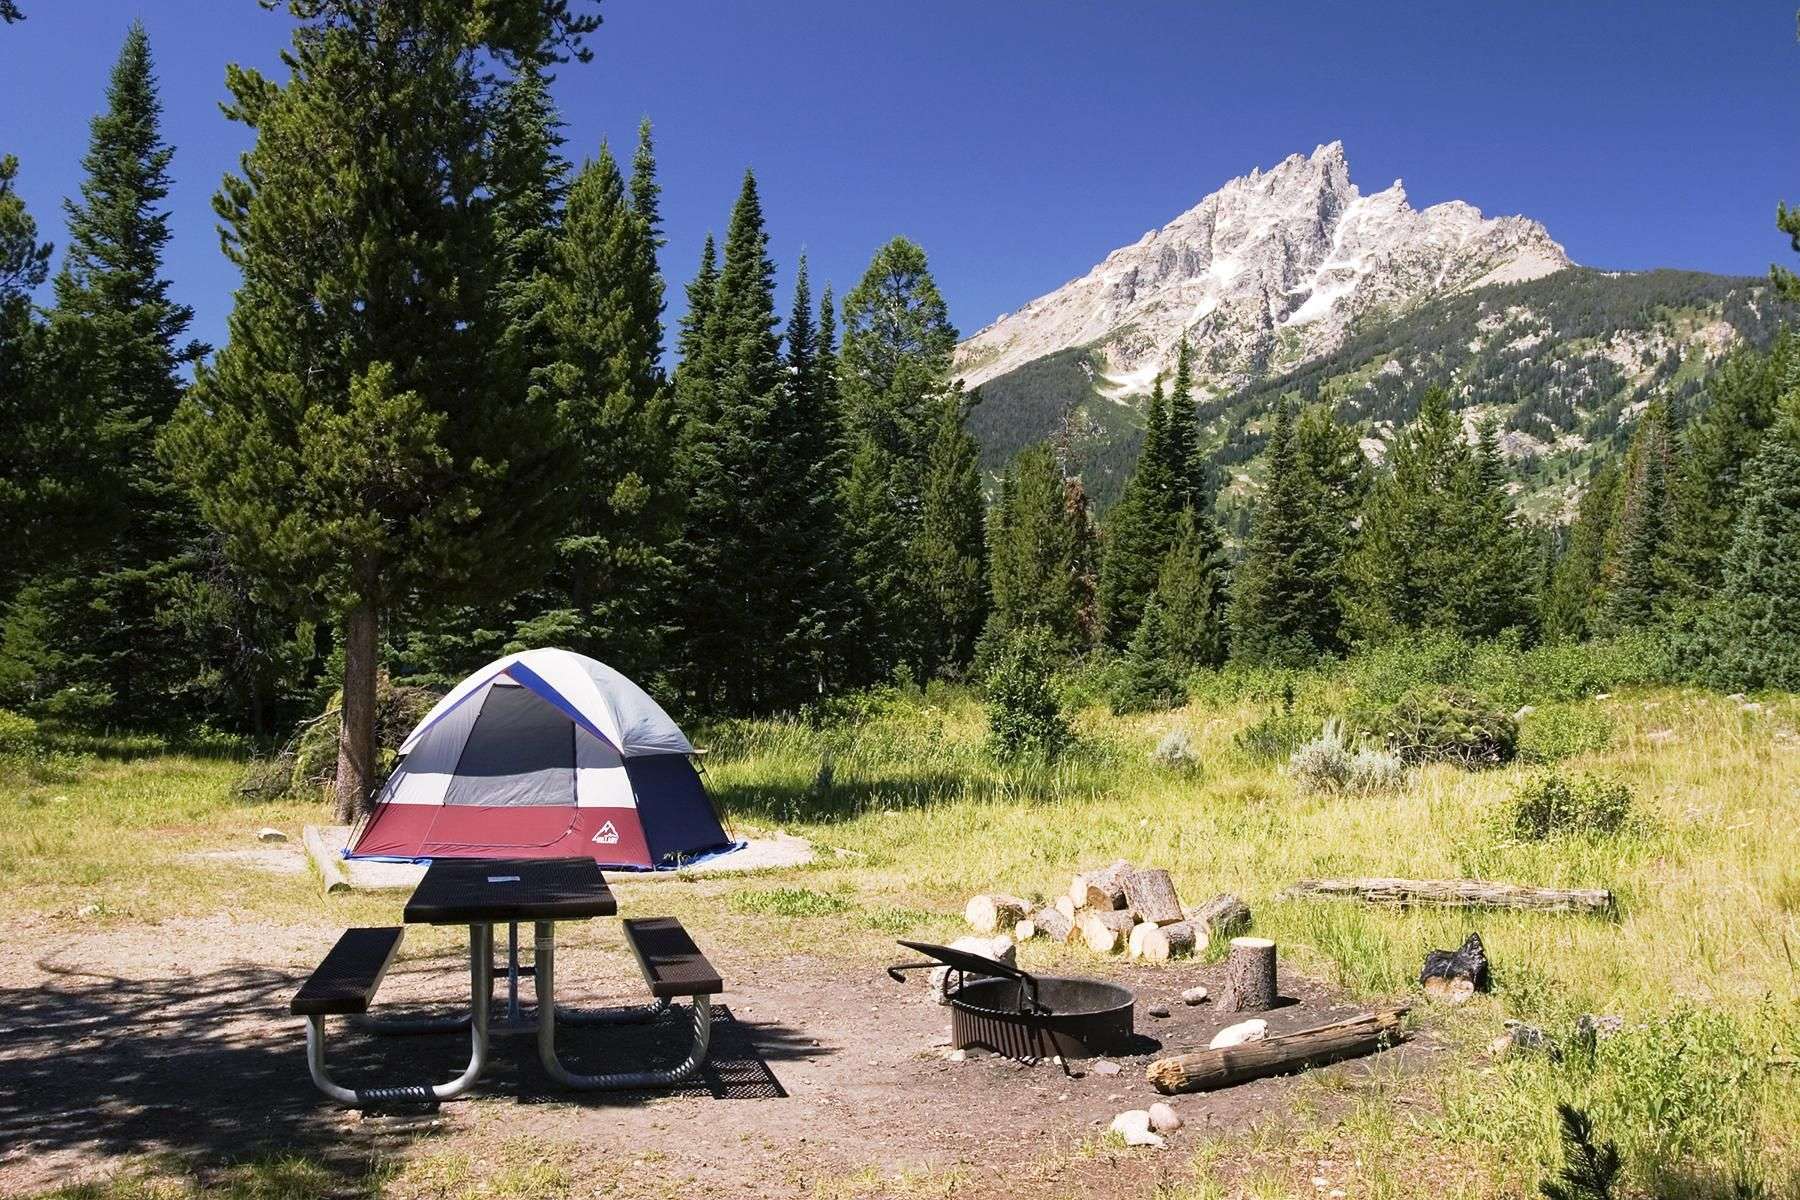 The 25 Best Campgrounds at Americaâs National Parks